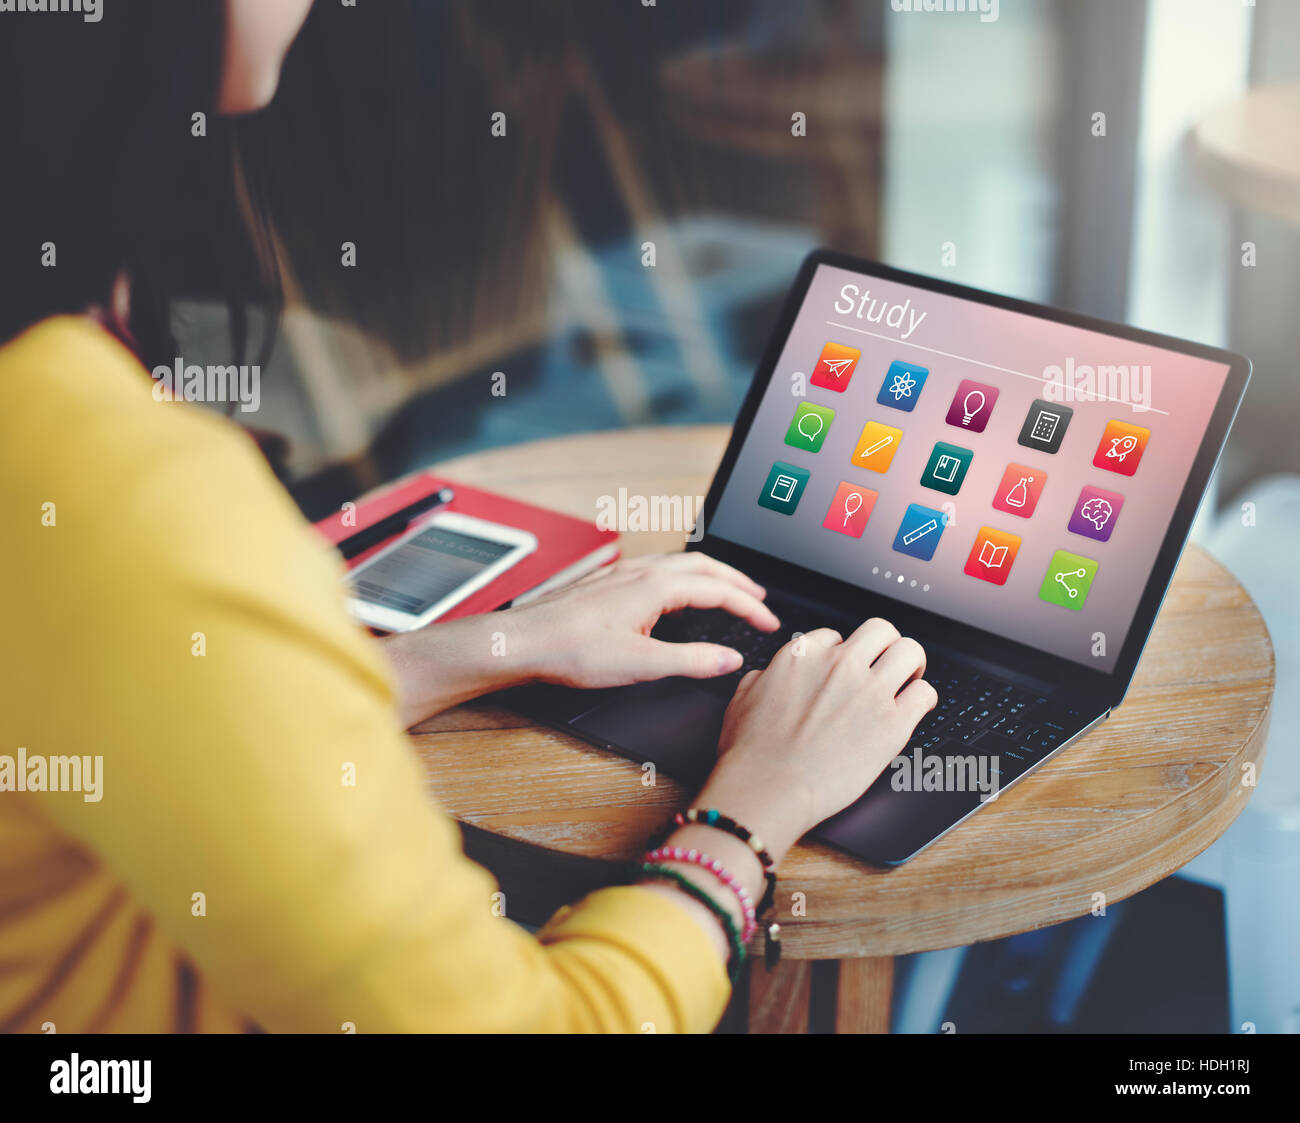 E Learning Online Education Application Concept Stock Photo Alamy